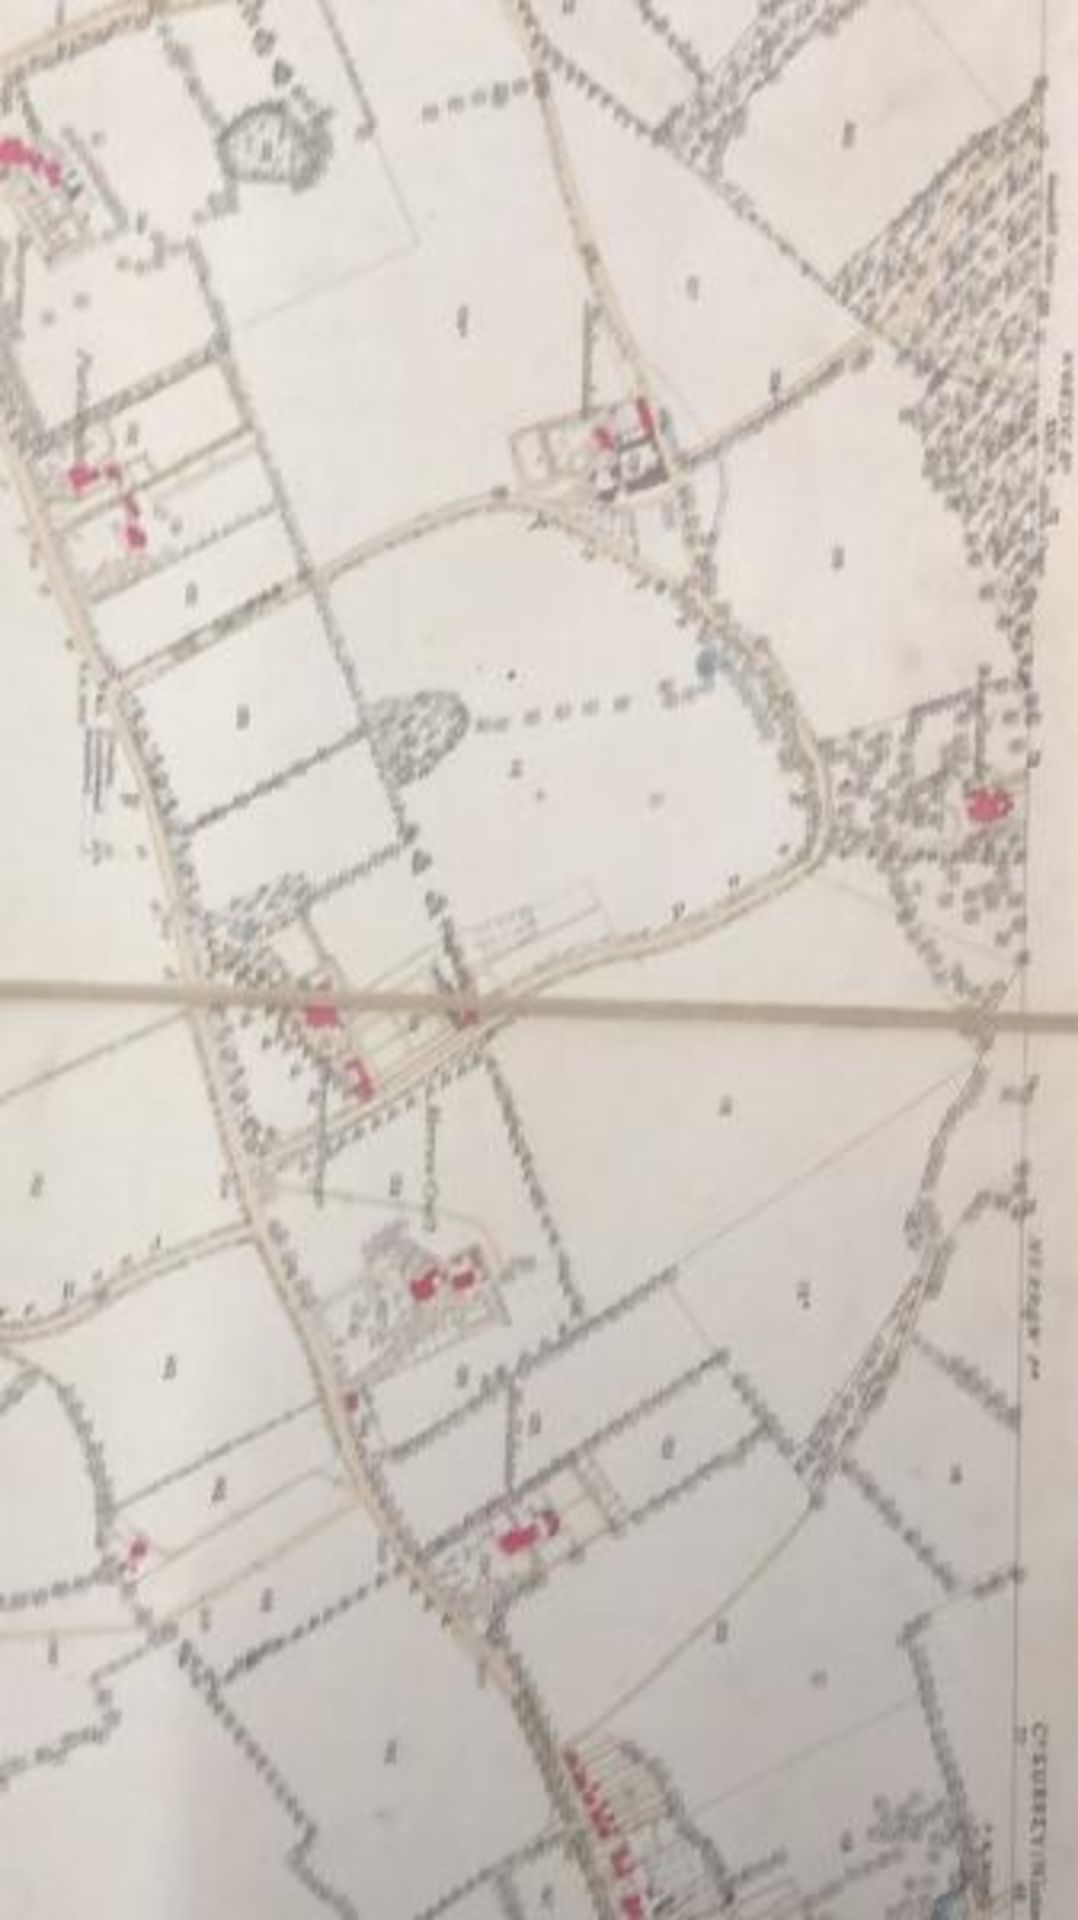 A large 25 inches to 1 mile scale map of Guildford, surveyed in 1827, 202.5cm x 134.5cm opened, - Image 15 of 16